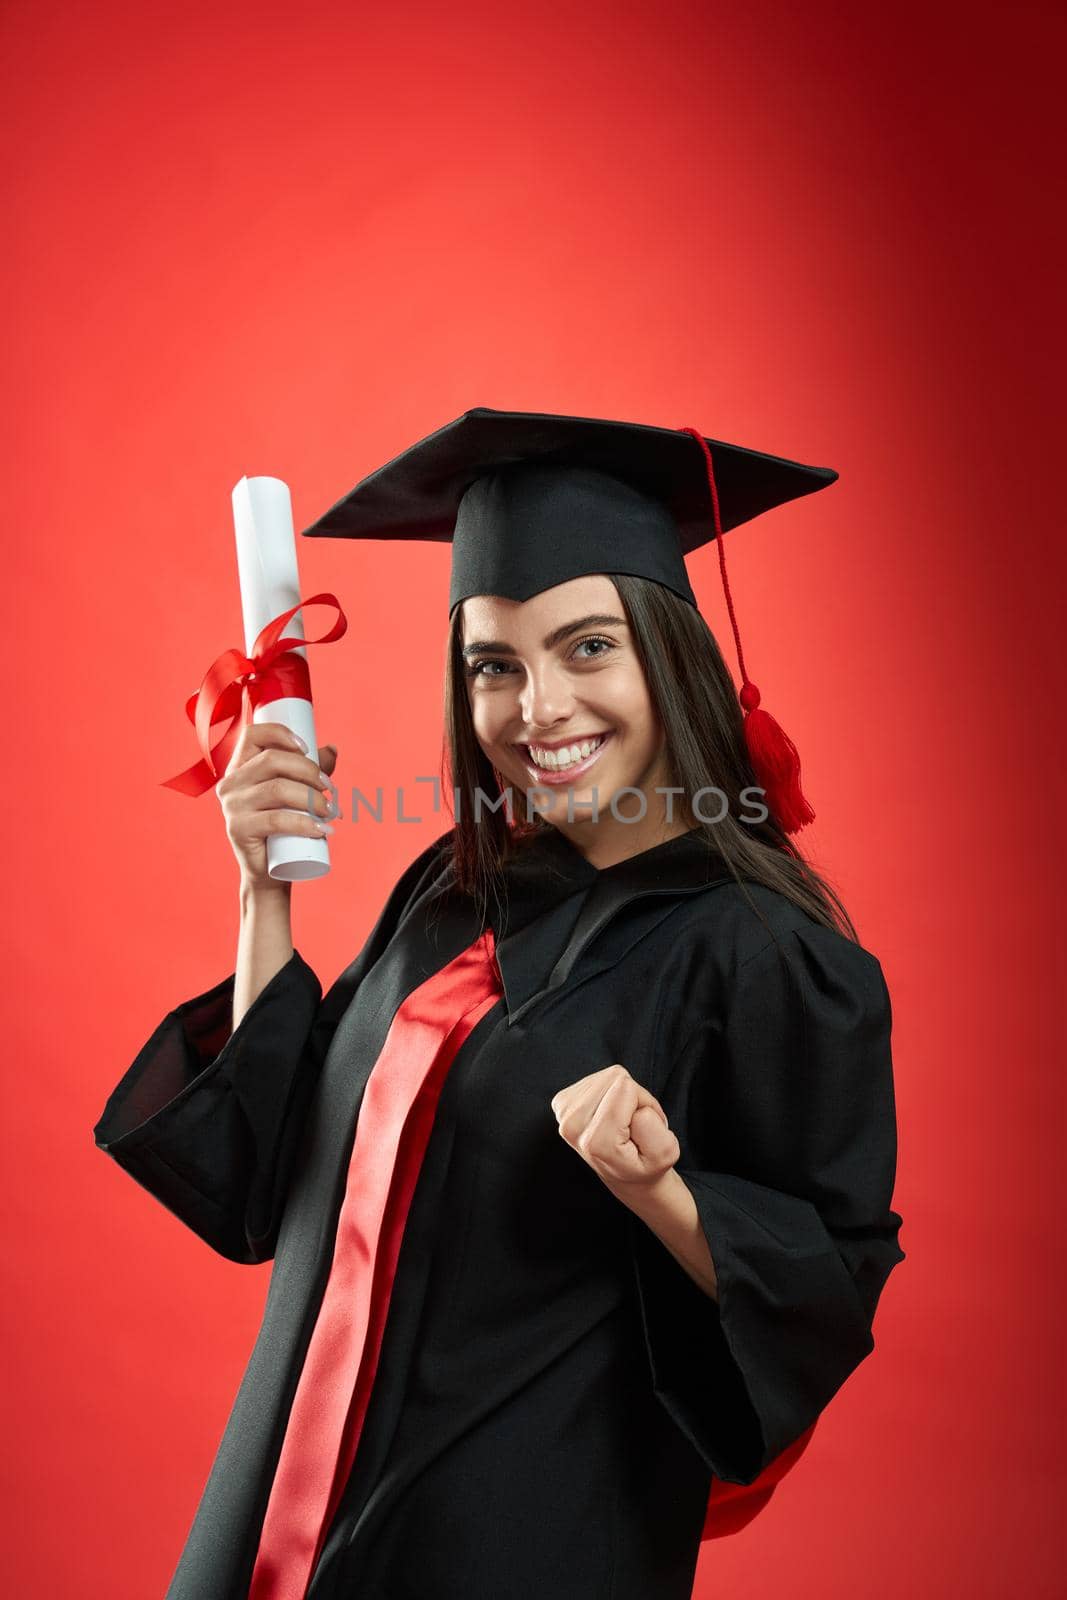 Front view of pretty young female holding diploma. Girl smiling, looking at camera, showing hurray, wearing graduate gown and mortarboard. Concept of education and youth.